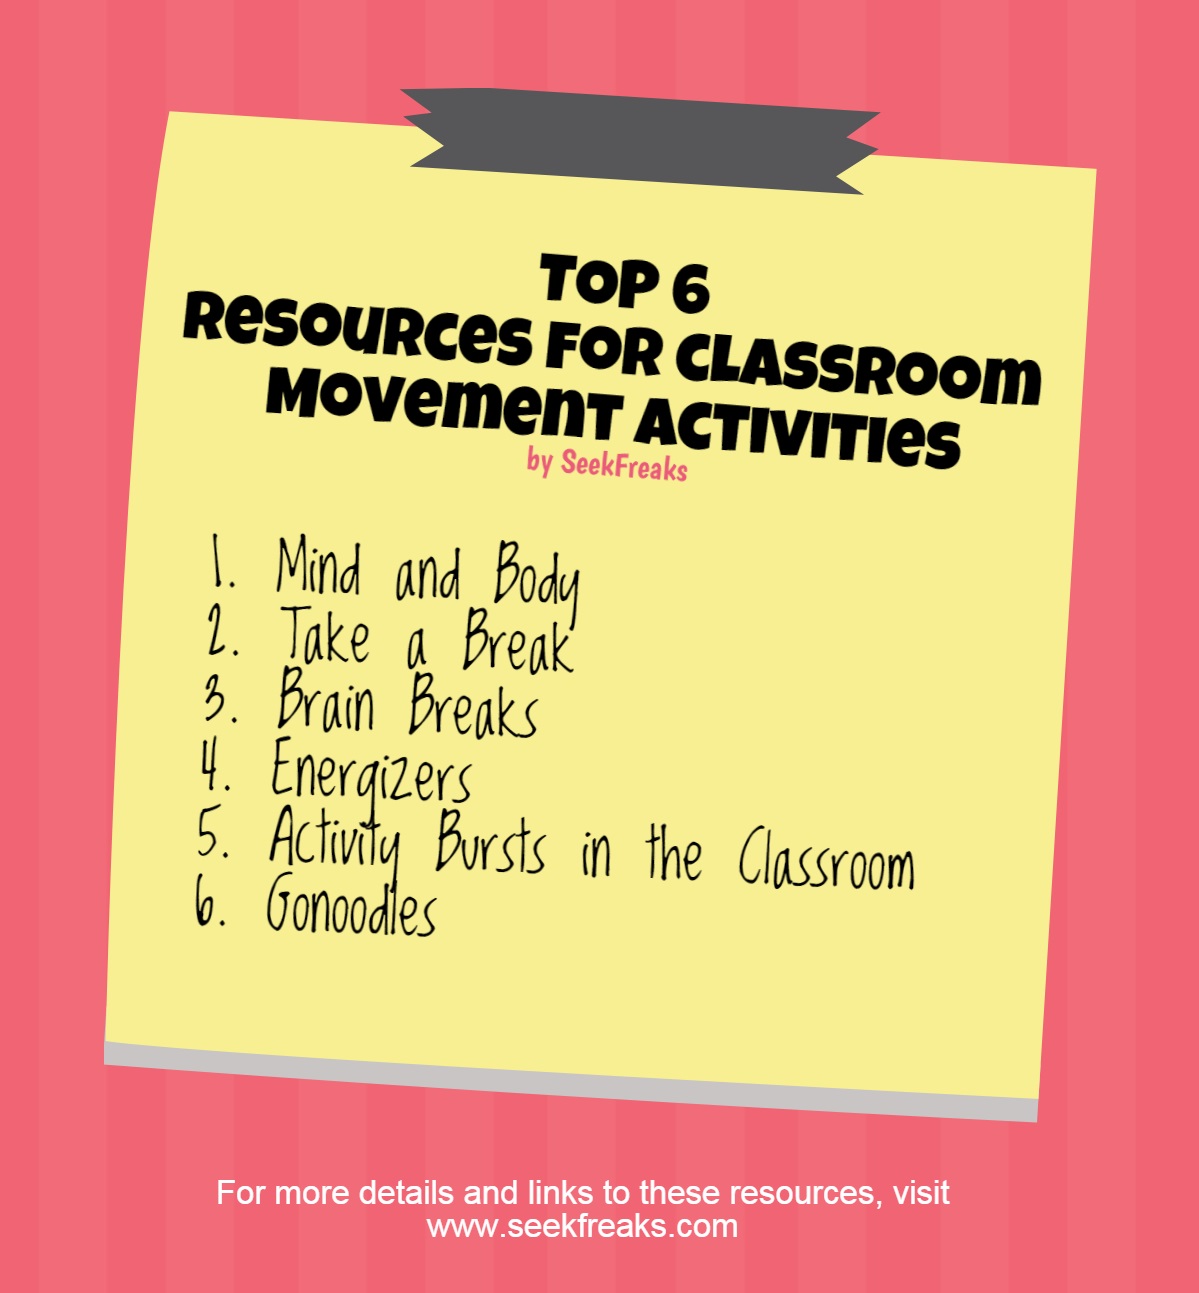 Need Movement Activities To Keep Kids Active At School? - Top Notch Teaching